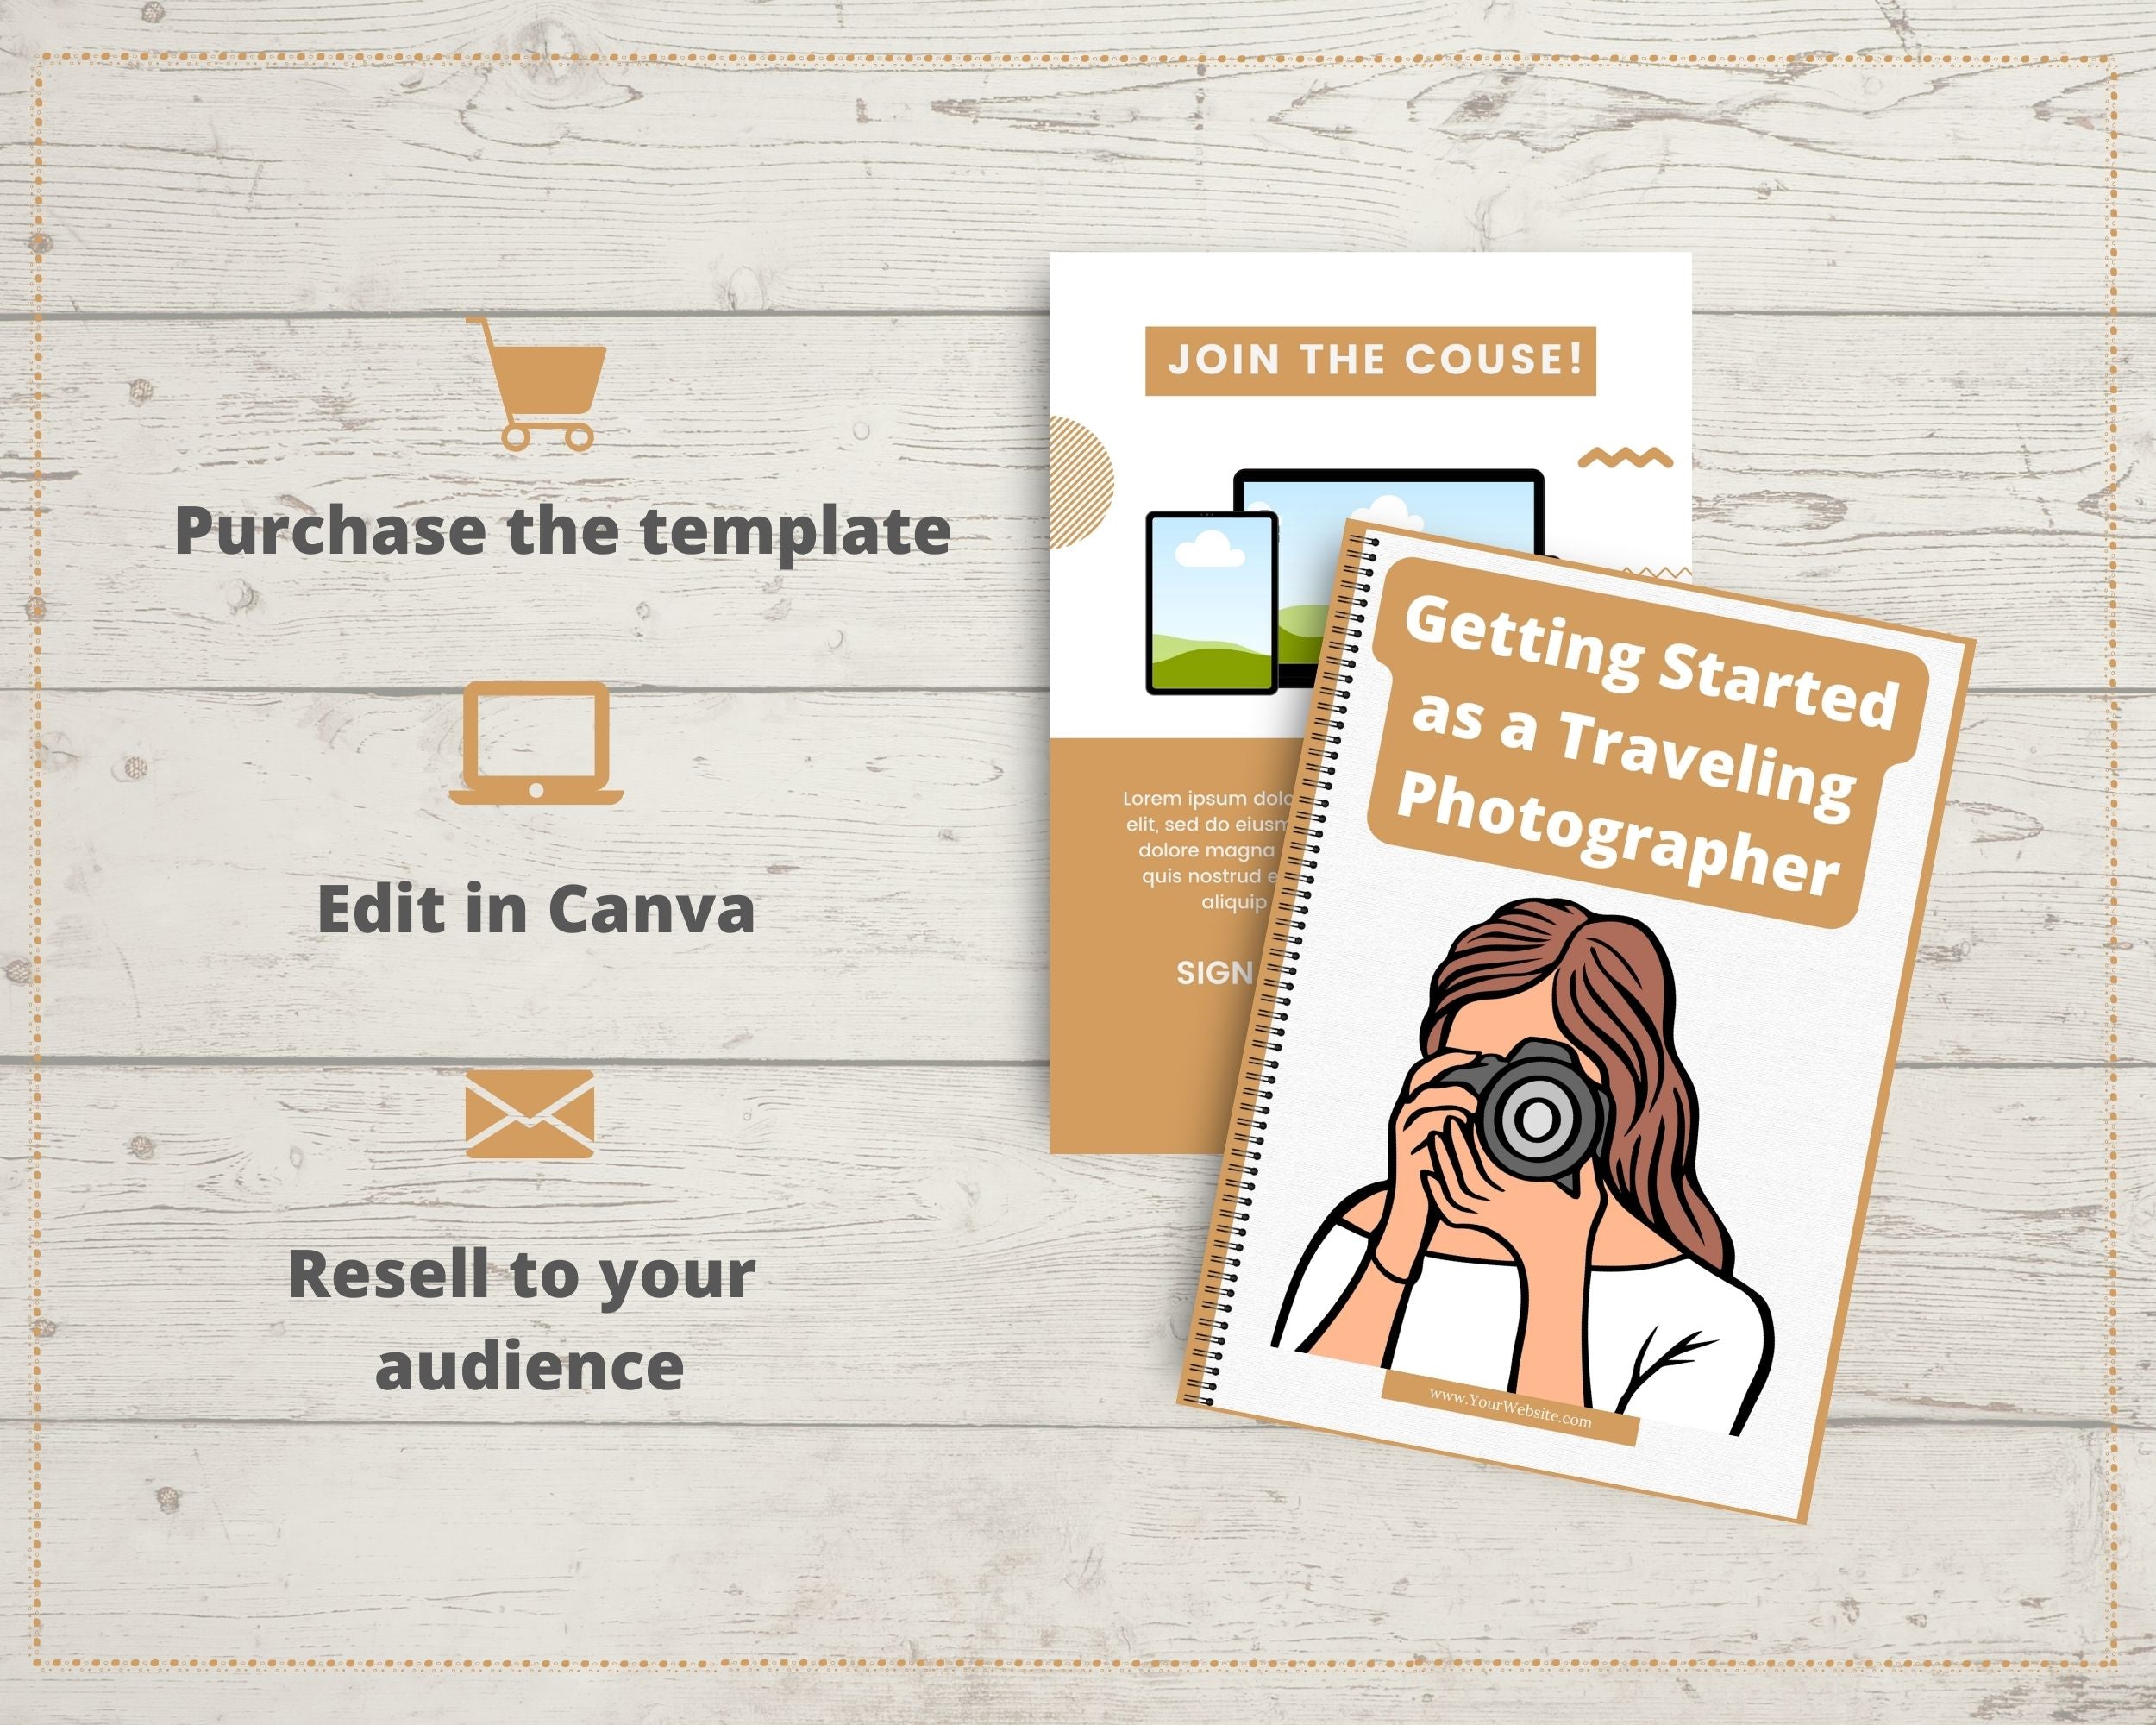 Editable Getting Started as a Traveling Photographer Ebook in Canva | Rebrandable and Resizable Canva Template